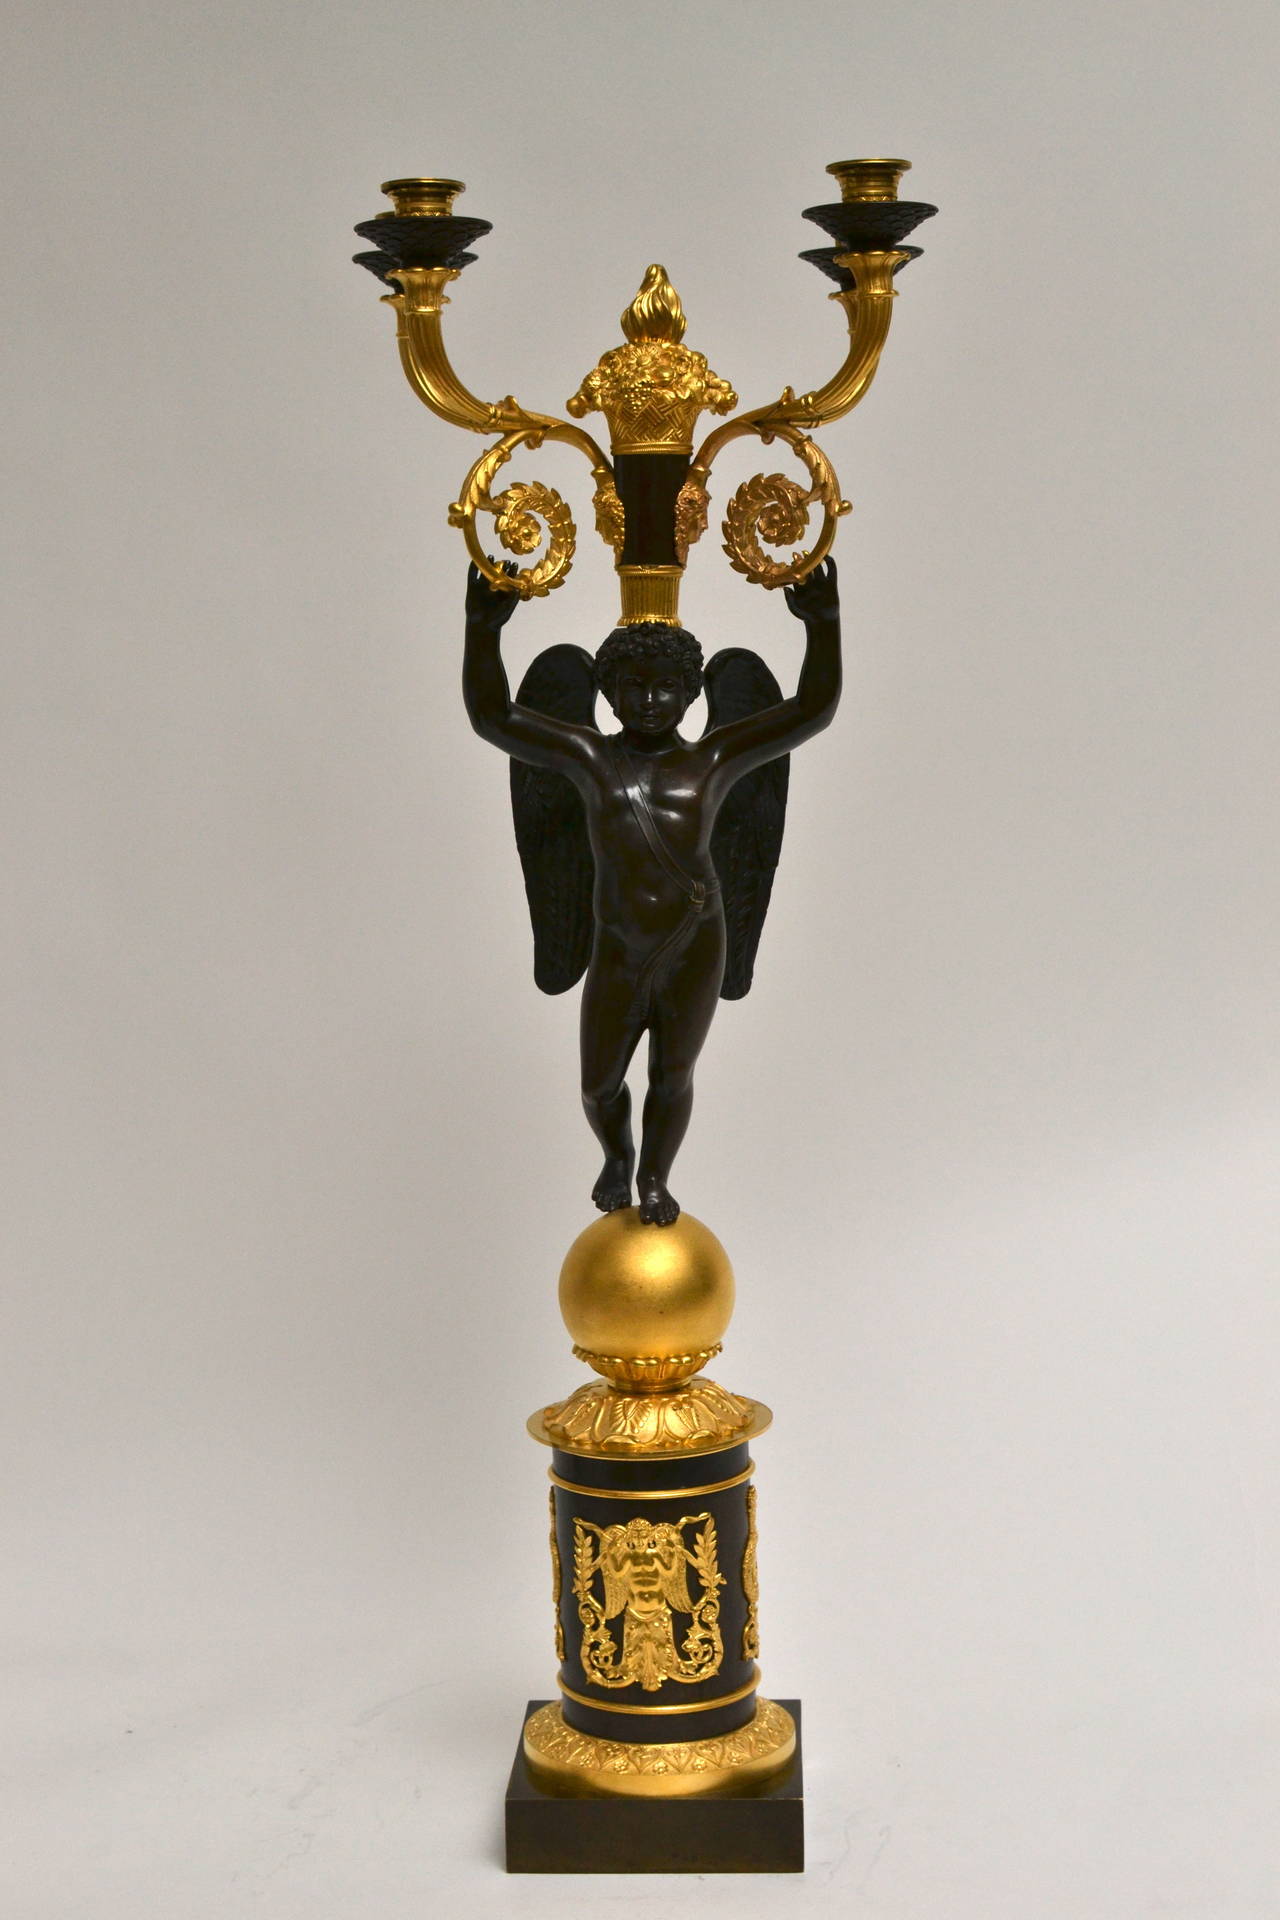 A large empire gilt bronze and patinated gilt bronze candelabra by Pierre Chiboust. Signed 